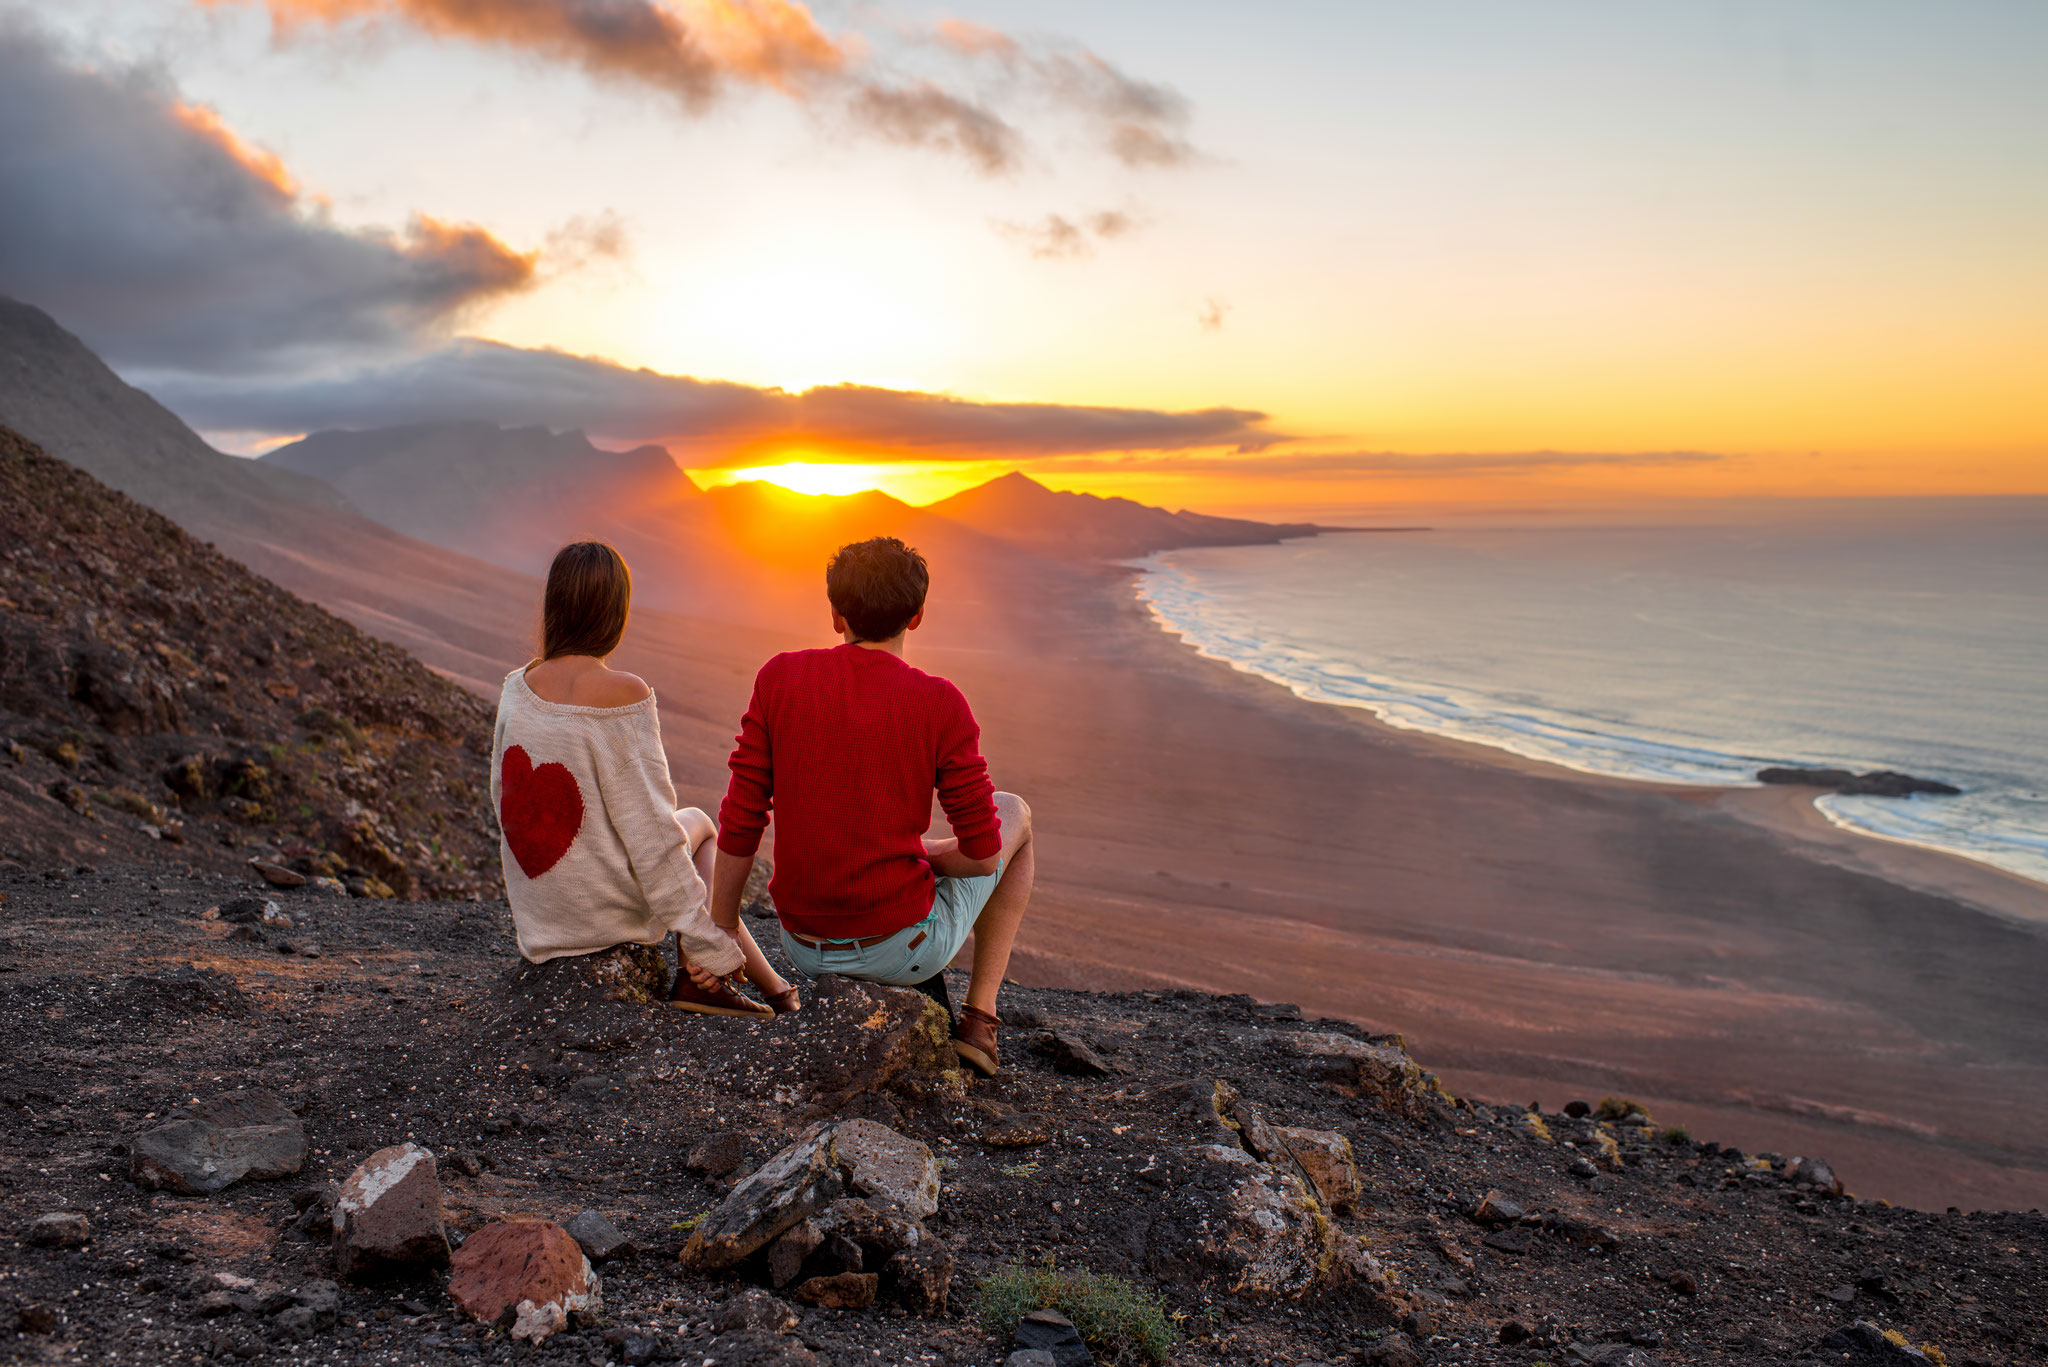 Tourism in the Canary Islands, Spain - Europe's Best Destinations